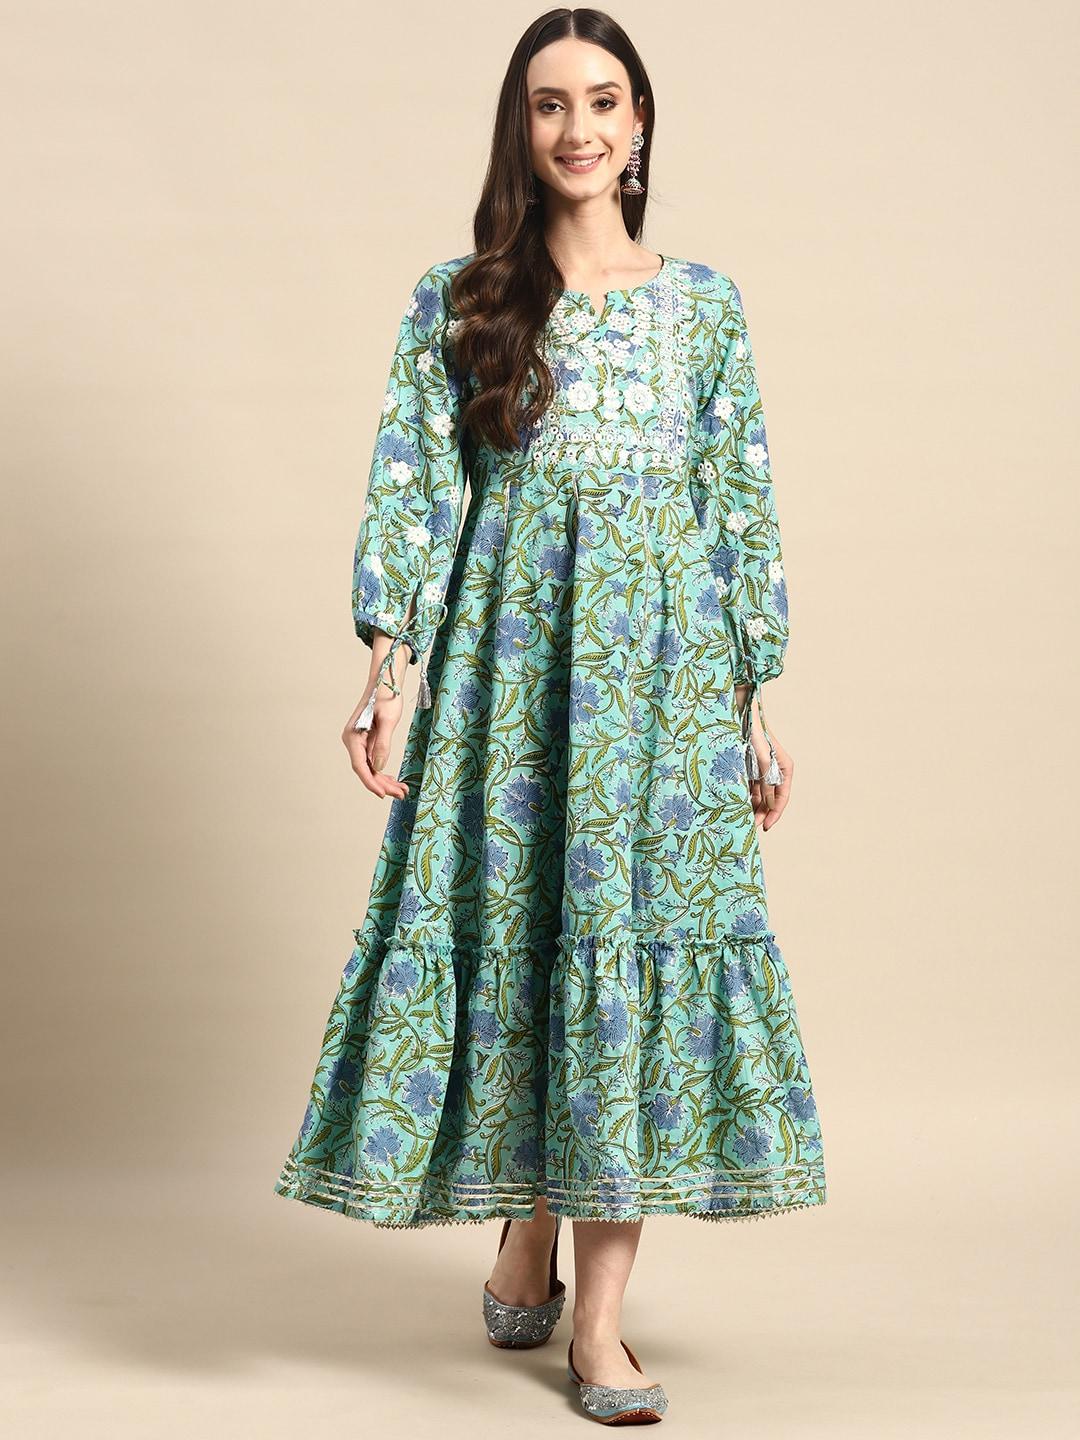 rangmayee embroidered tiered a-line ethnic maxi dress